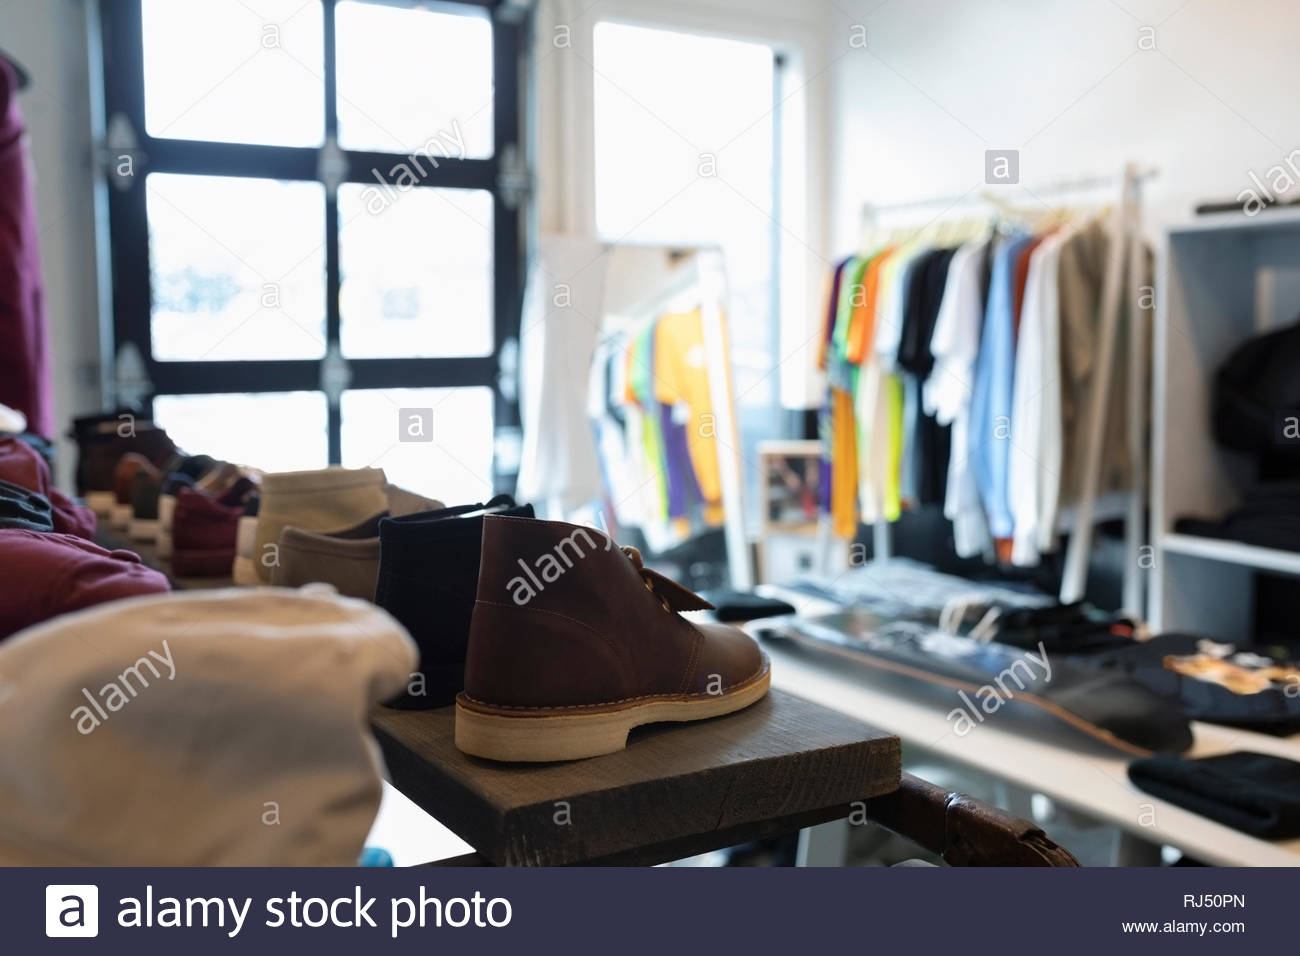 Clothing and shoes in menswear clothing shop Stock Photo